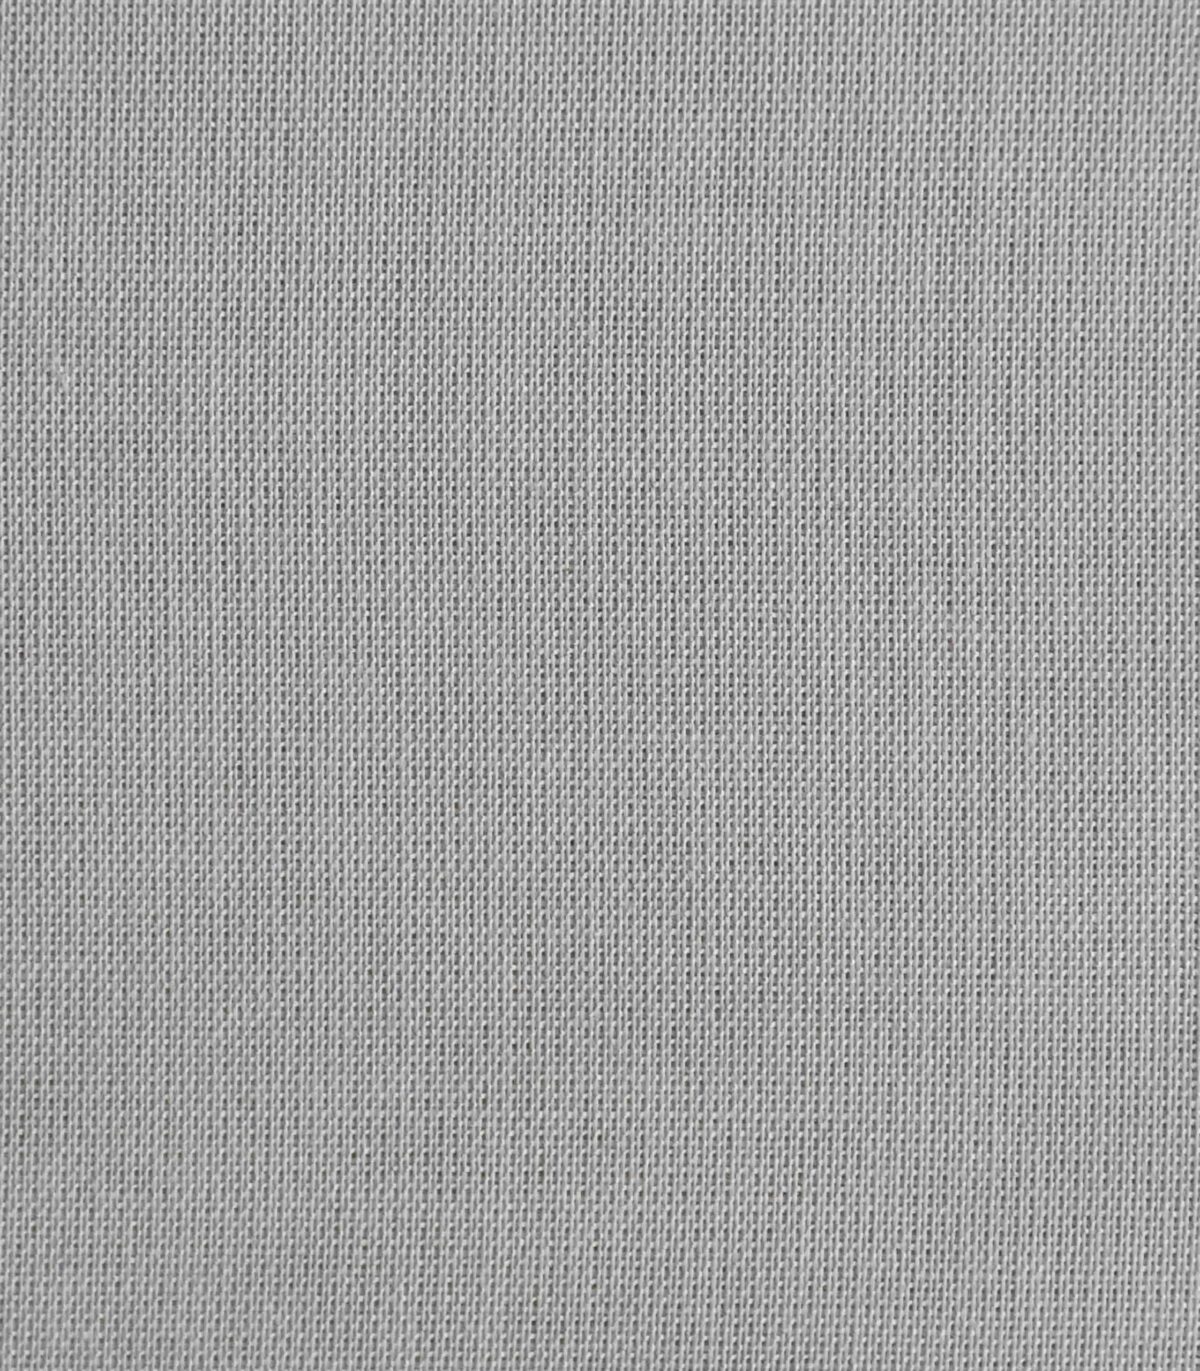 Viscose Material RFD Woven Fabric